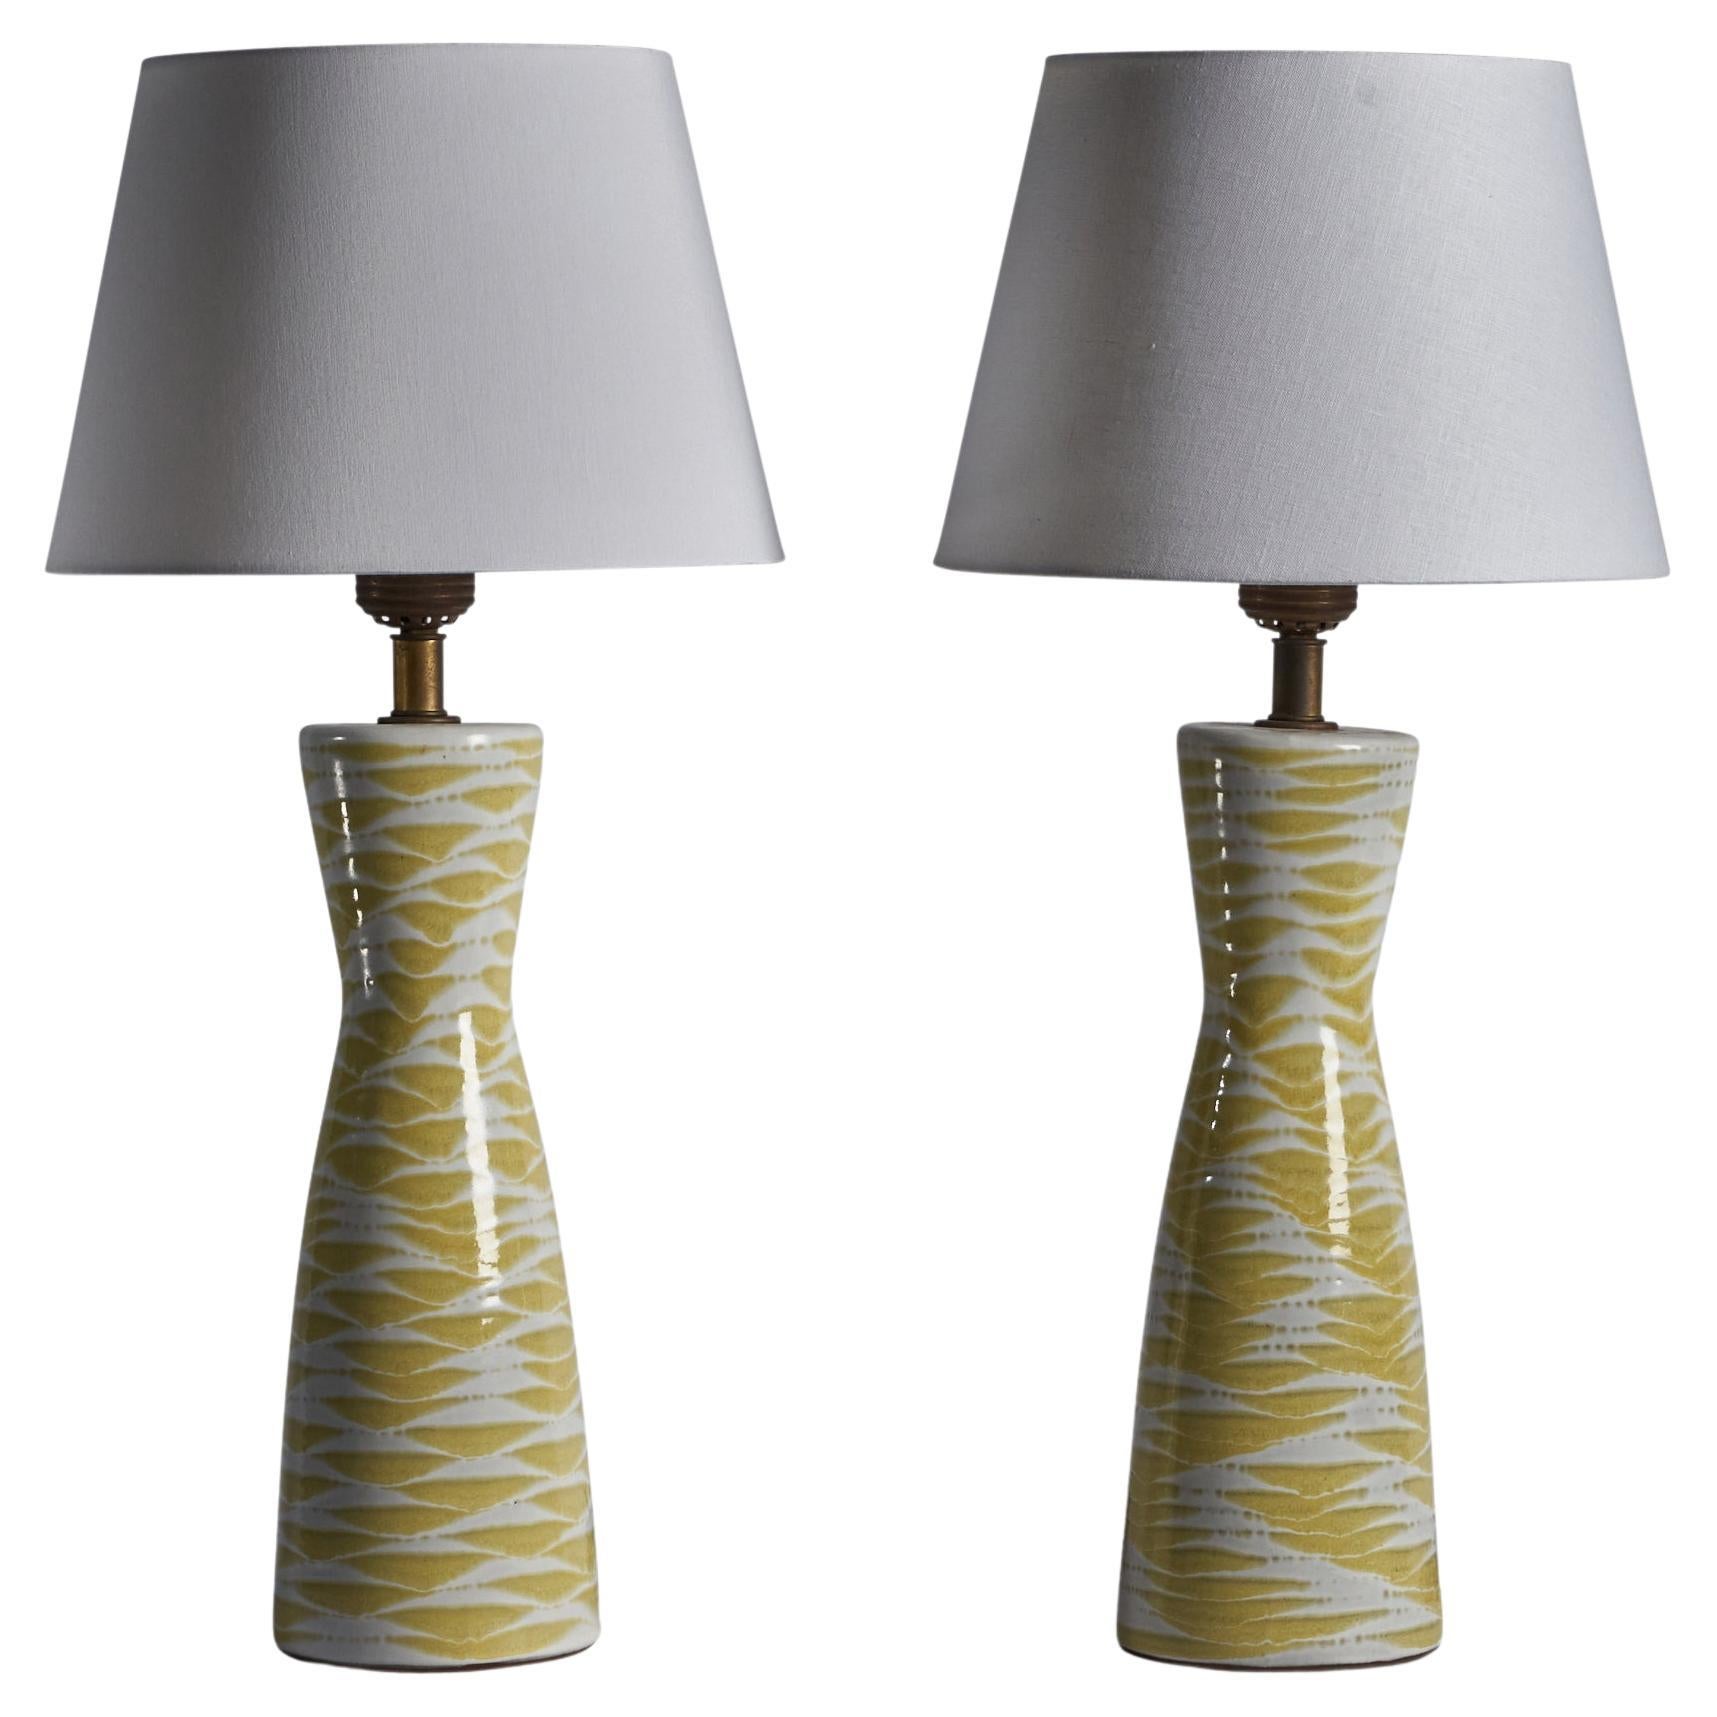 Lee Rosen, Large Table Lamps, Ceramic, Brass, USA, 1950s For Sale